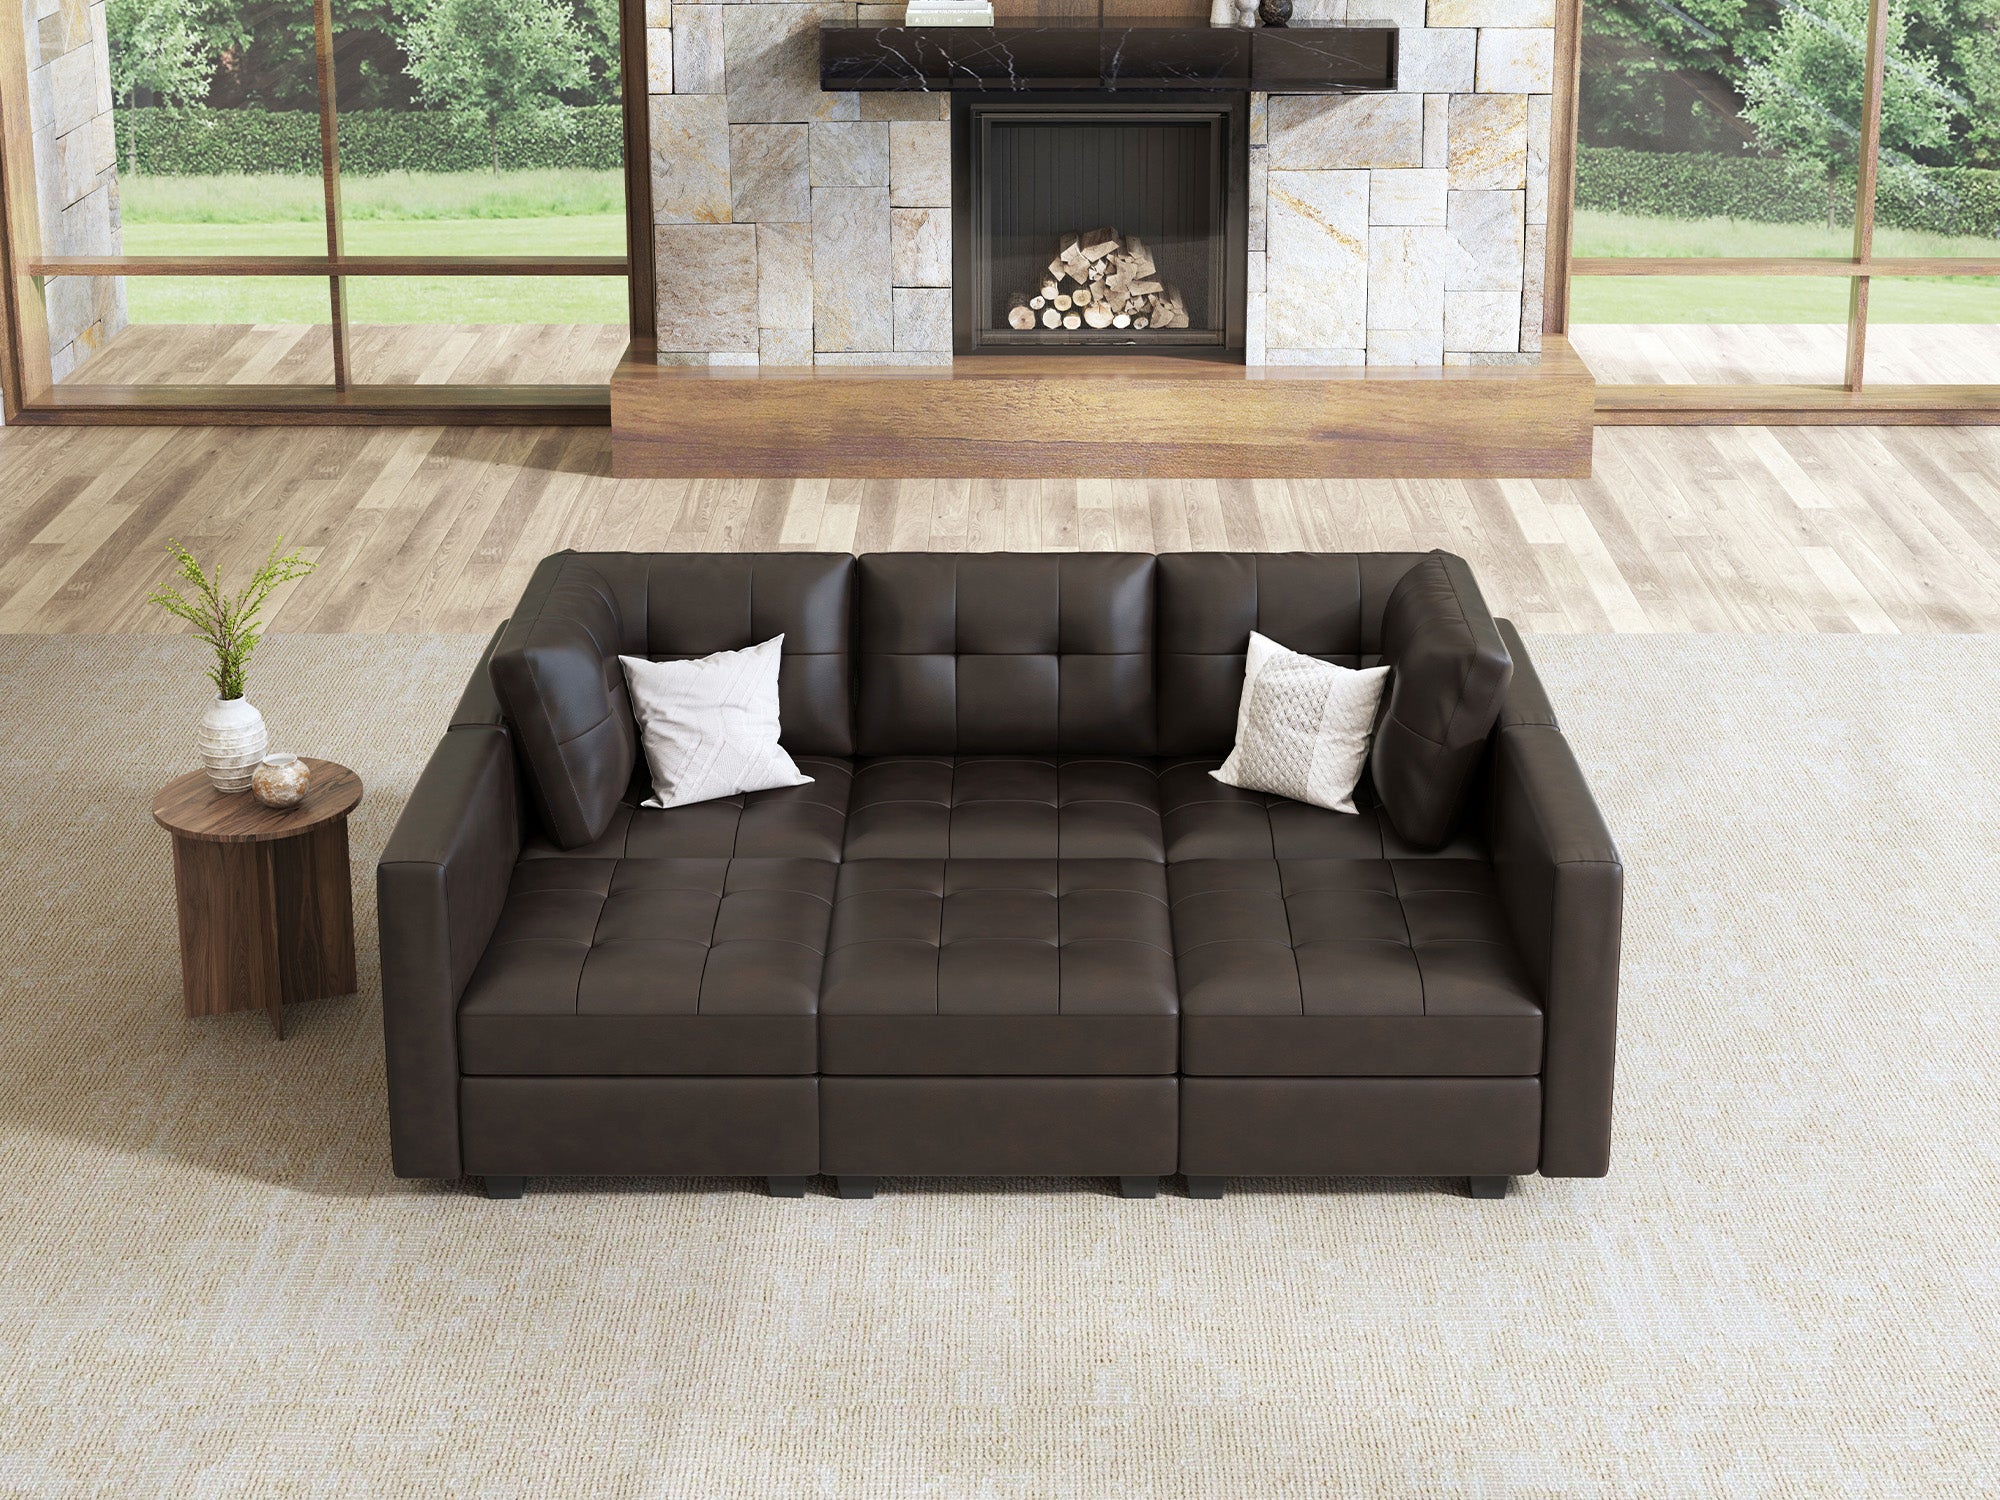 HONBAY 6-Piece Faux Leather Modular Sleeper Sectional With Storage Seat